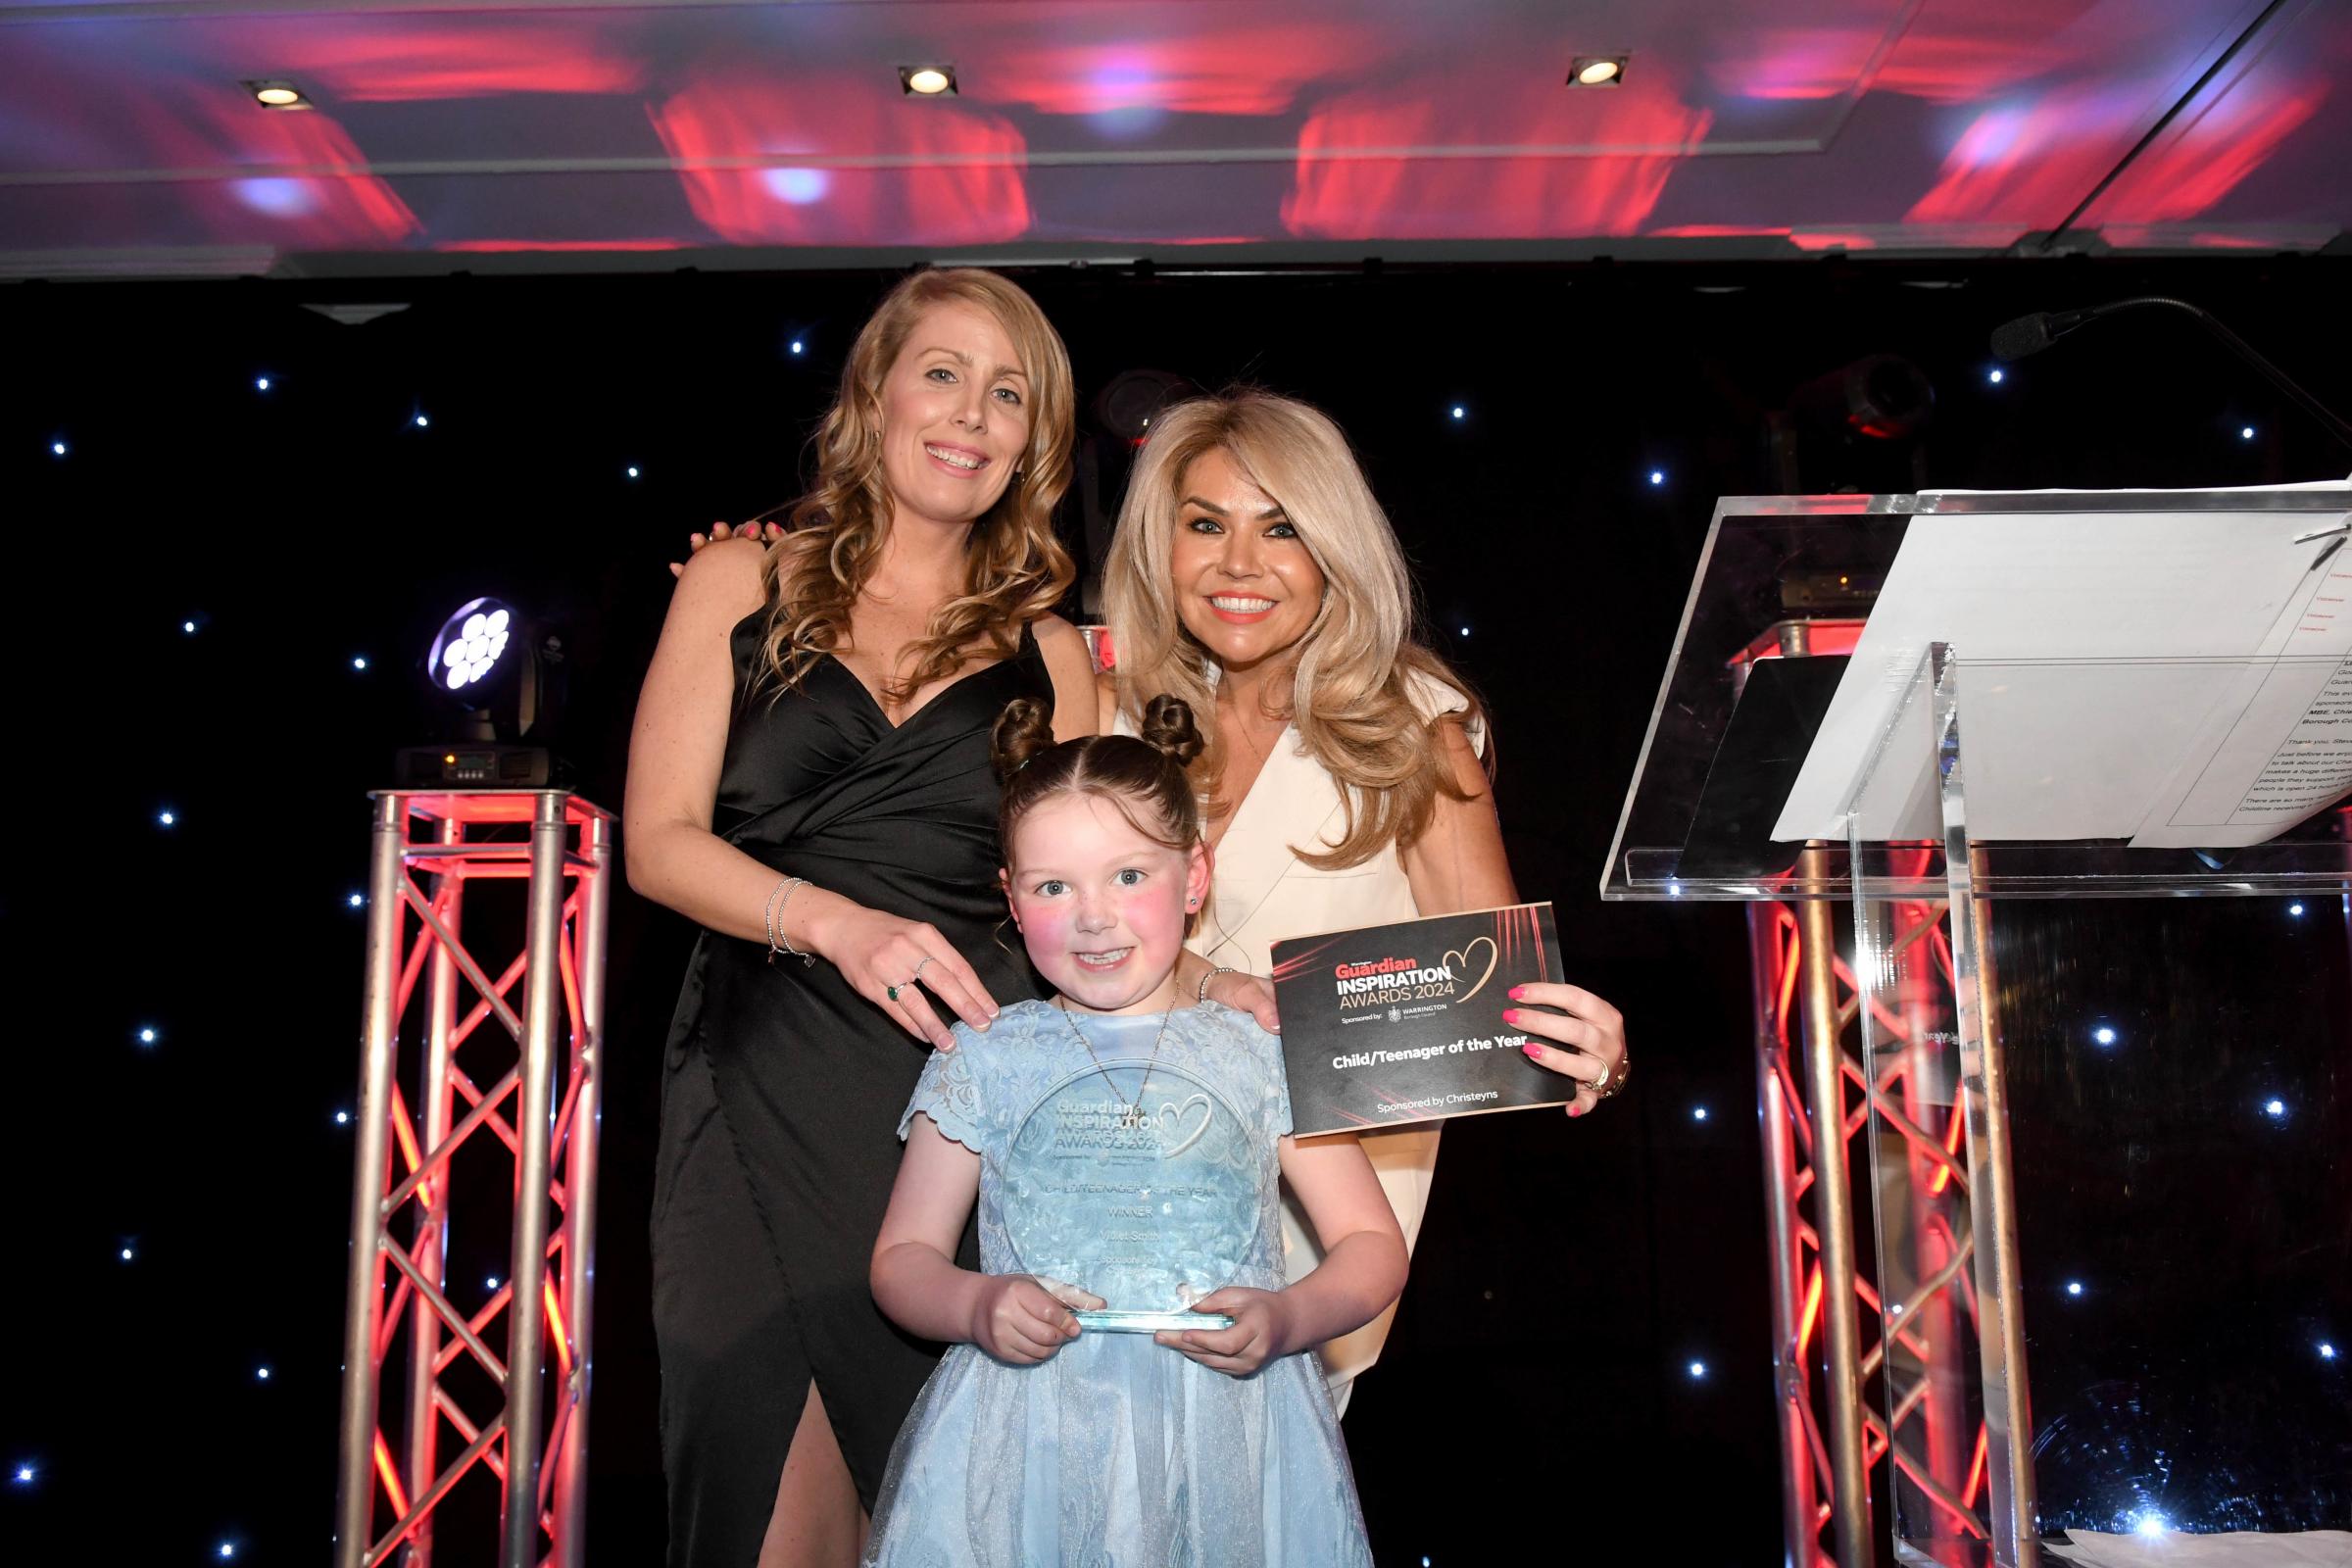 Child of the Year Violet Smith with Leanne Campbell and Sarah Hobbs from Christeyns